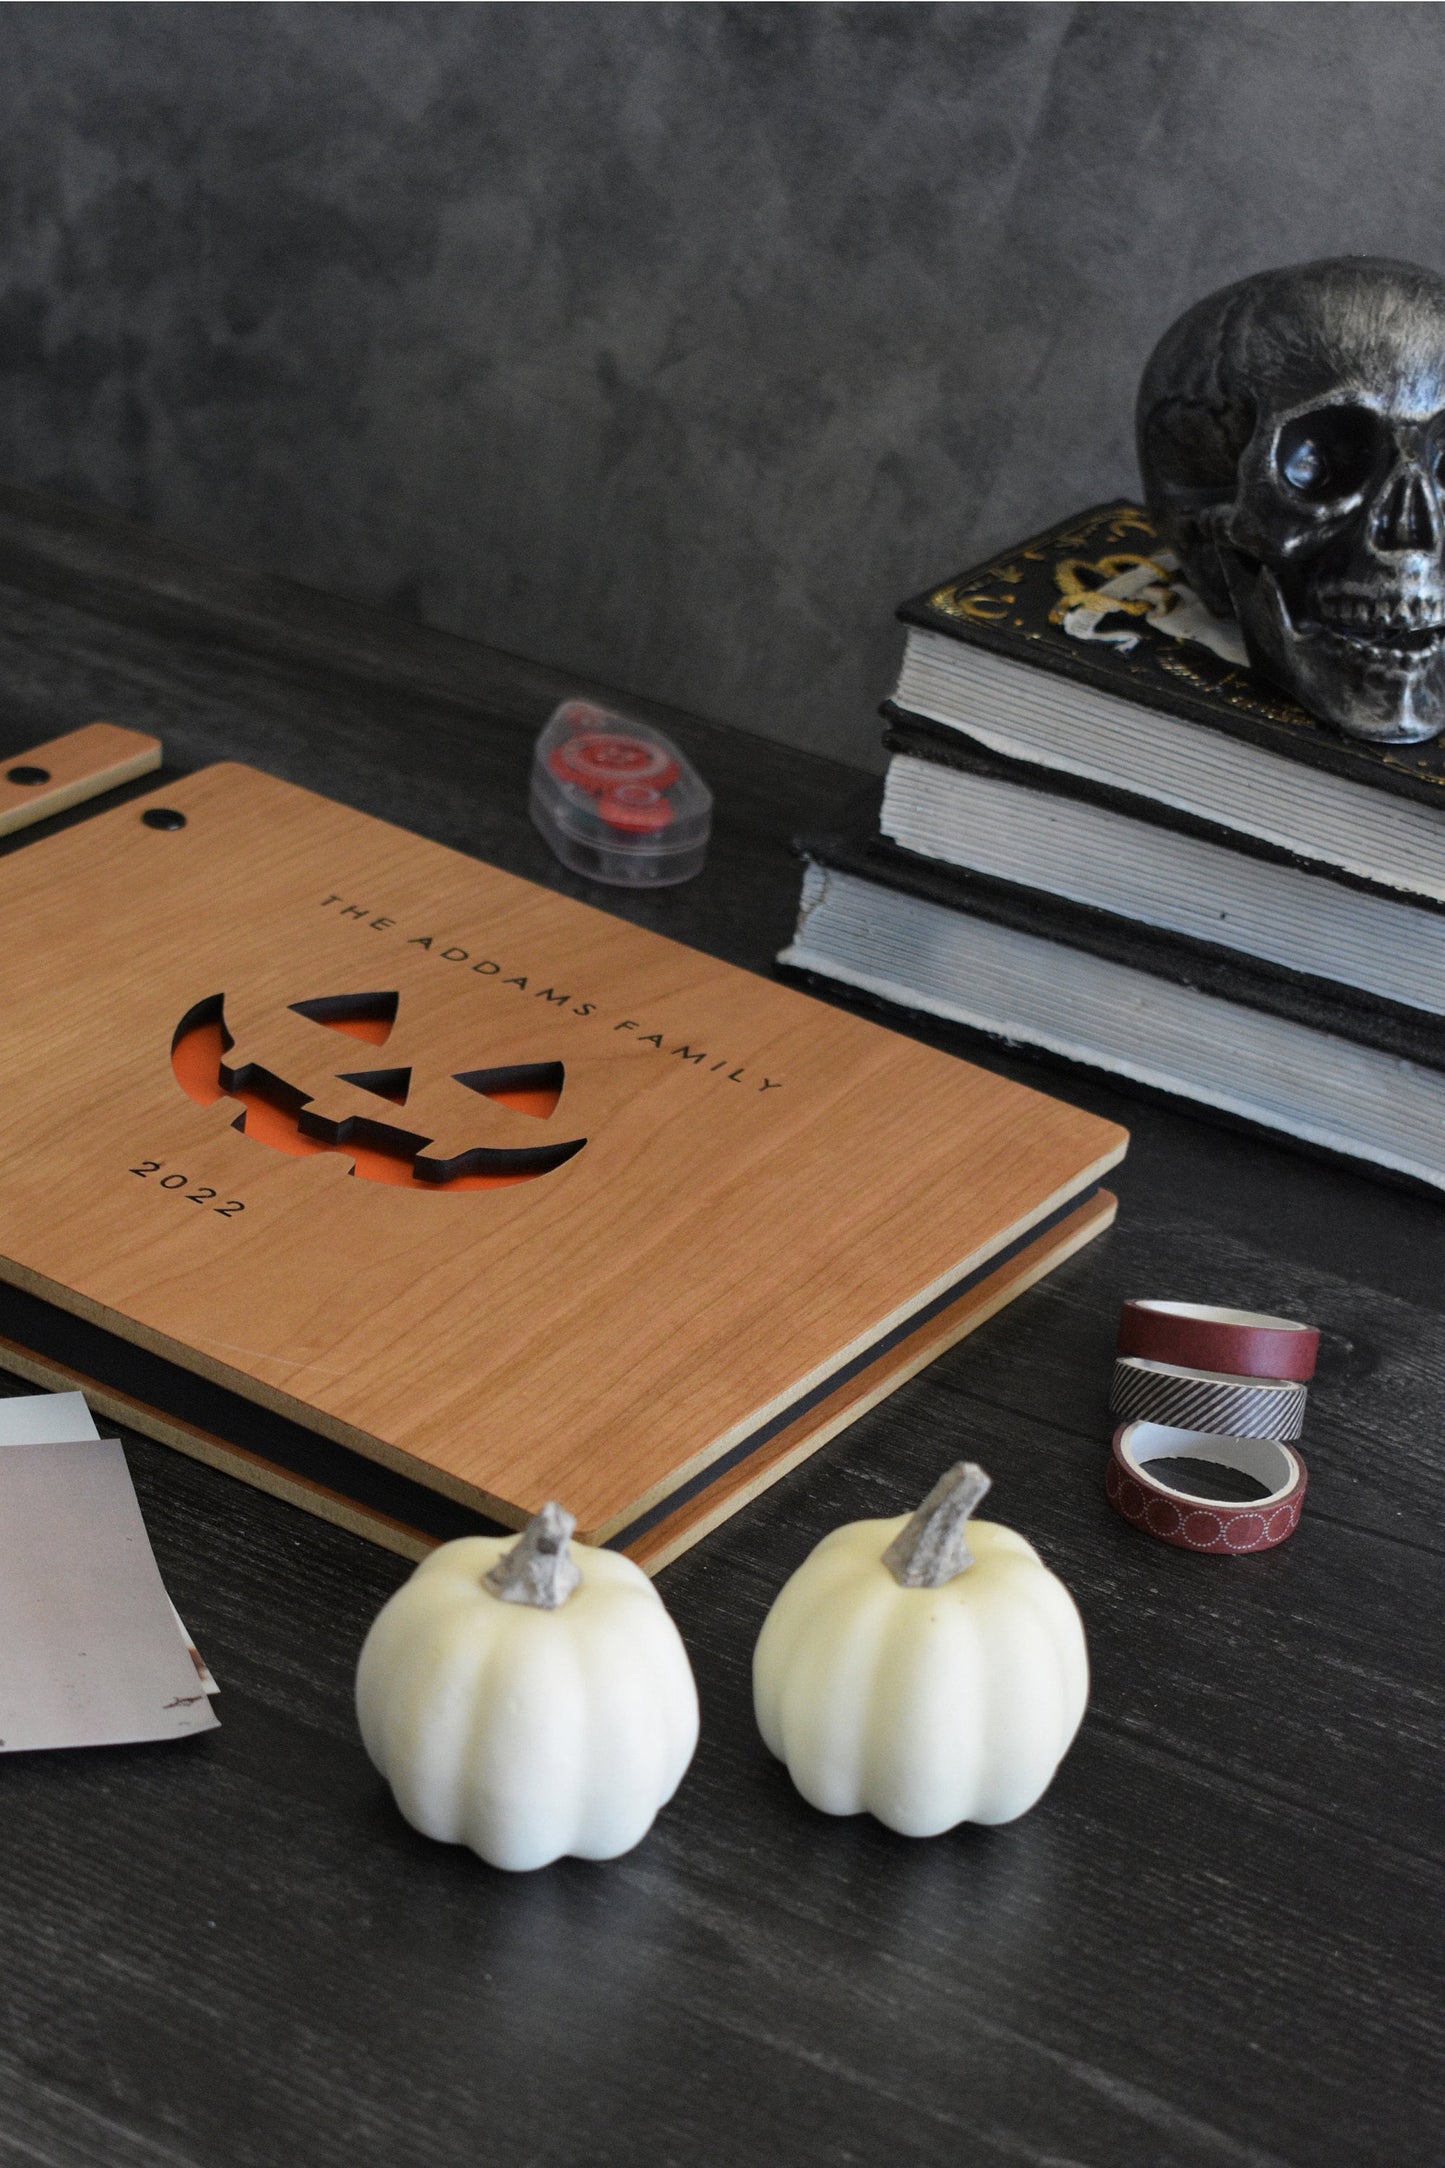 An 8.5x11" guest book lies on a table. Made of cherry wood, black vegan leather binding, and black hardware. The front cover reads The Addams Family, 2022 with an engraved pumpkin in the center.